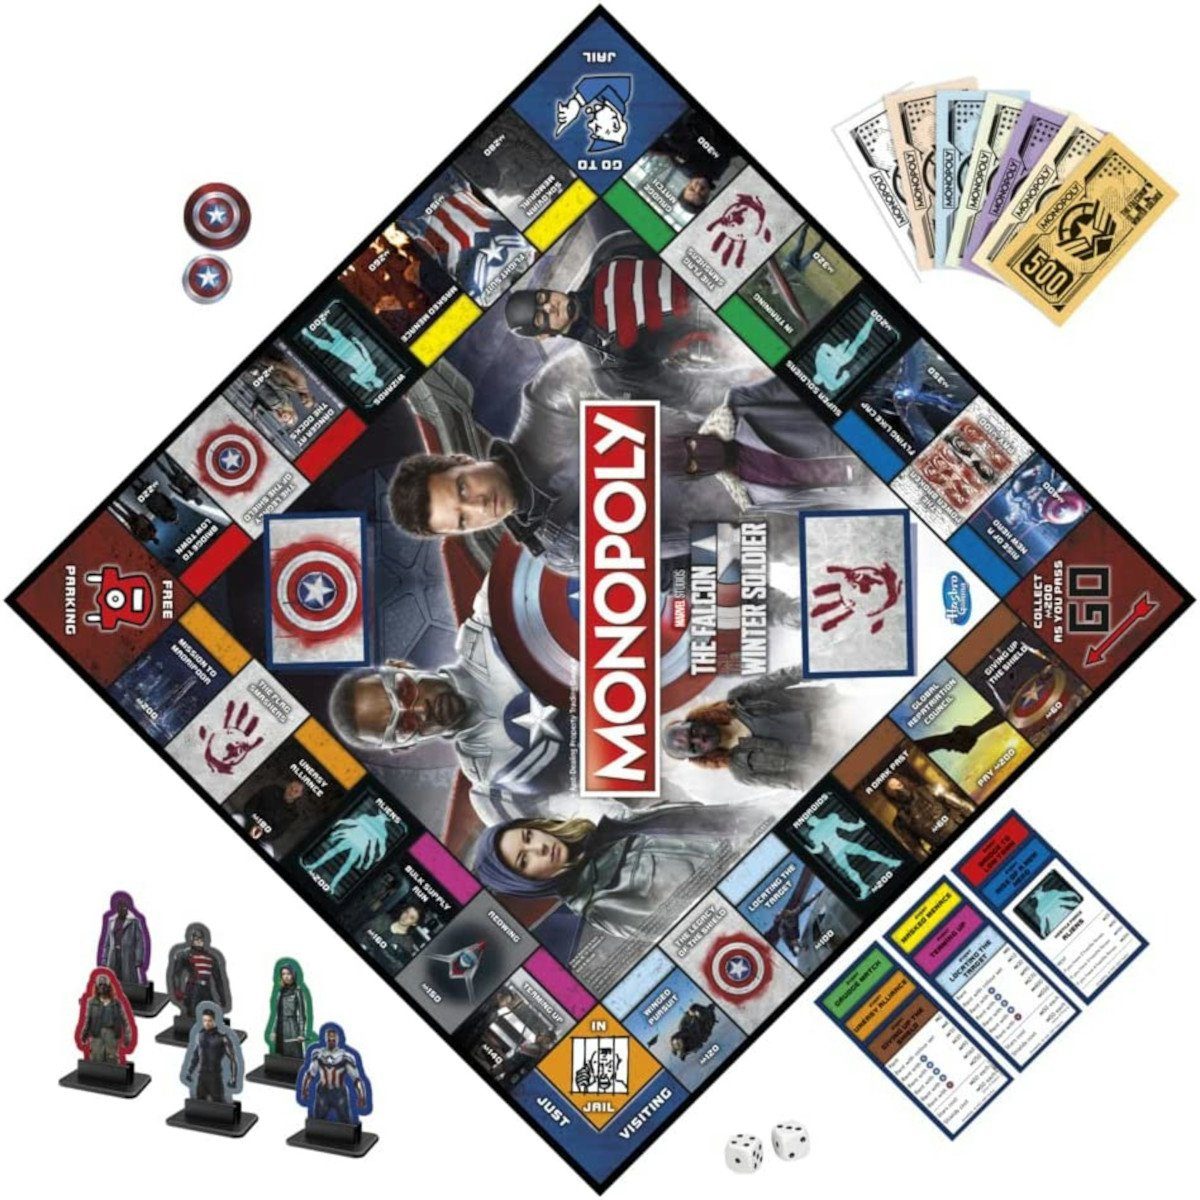 Hasbro Spiel, Brettspiel Monopoly - The and the Falcon Winter Soldier (englisch)